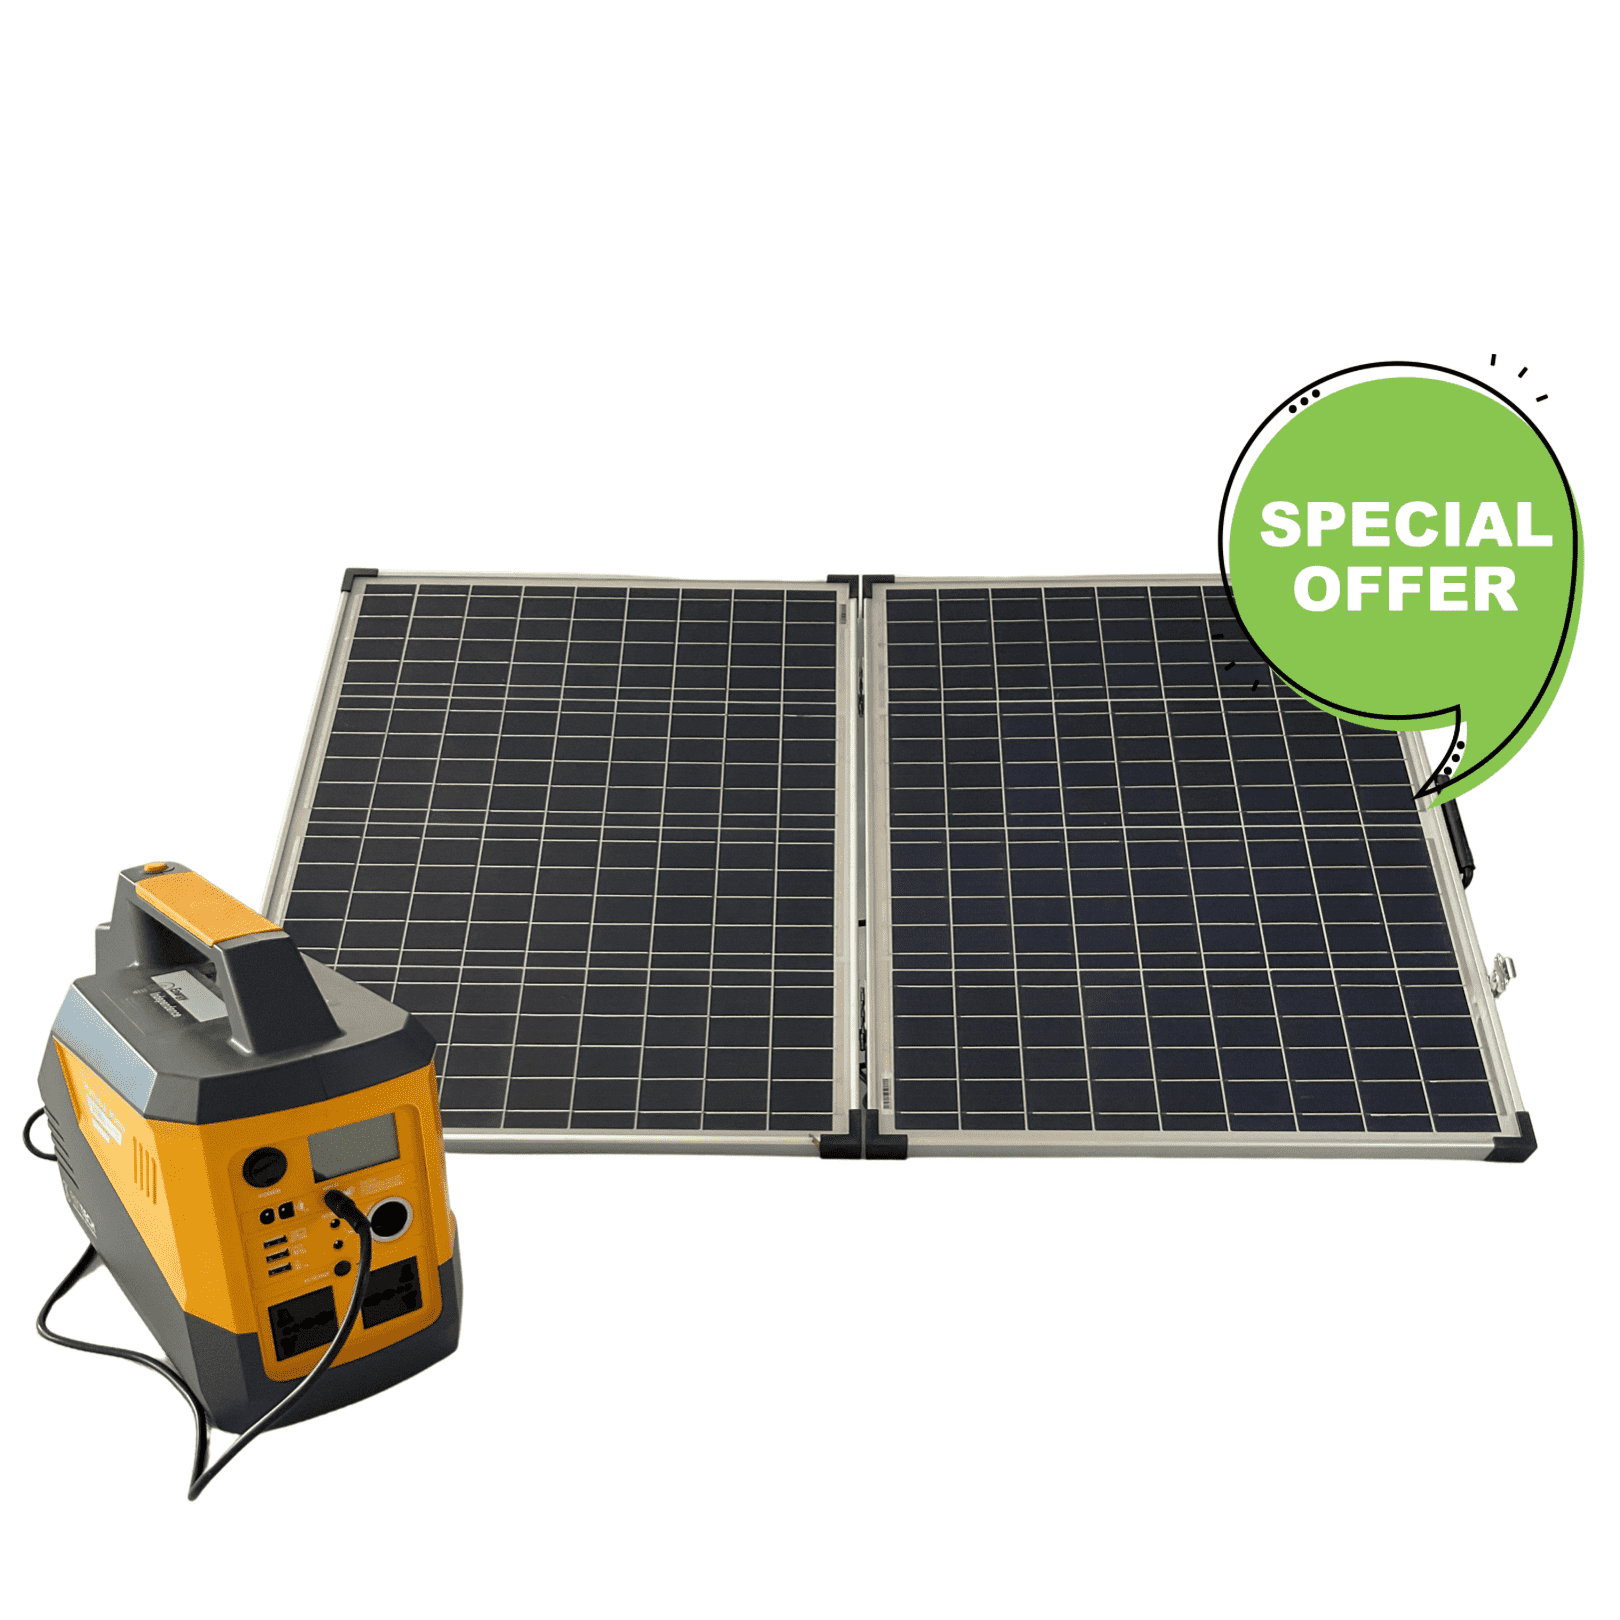 PPS750 Portable Power Station and 100W Foldable Poly Solar Panel Offer